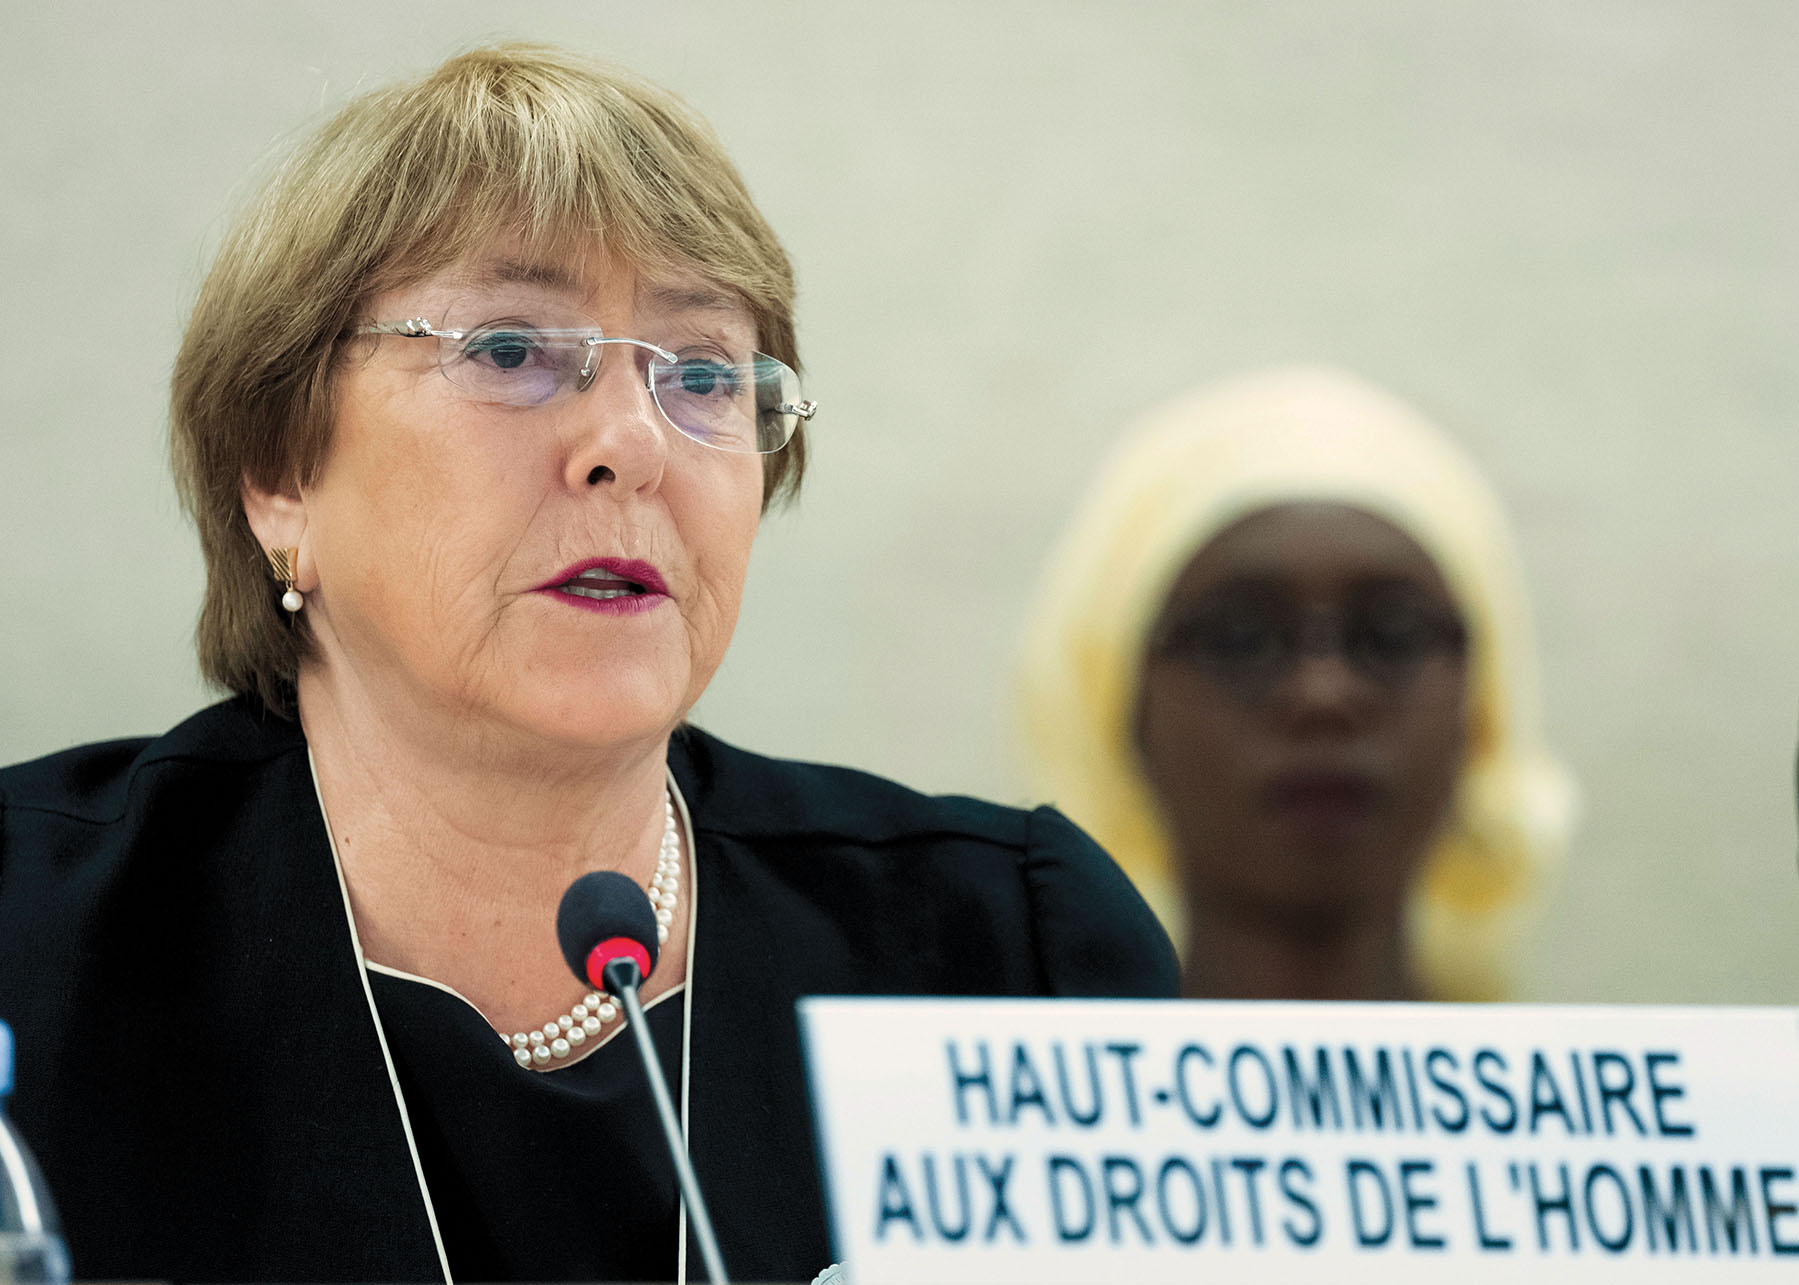 Michelle Bachelet speaks before the United Nations Human Rights Council, September 2018. (Photo by Violaine Martin.)